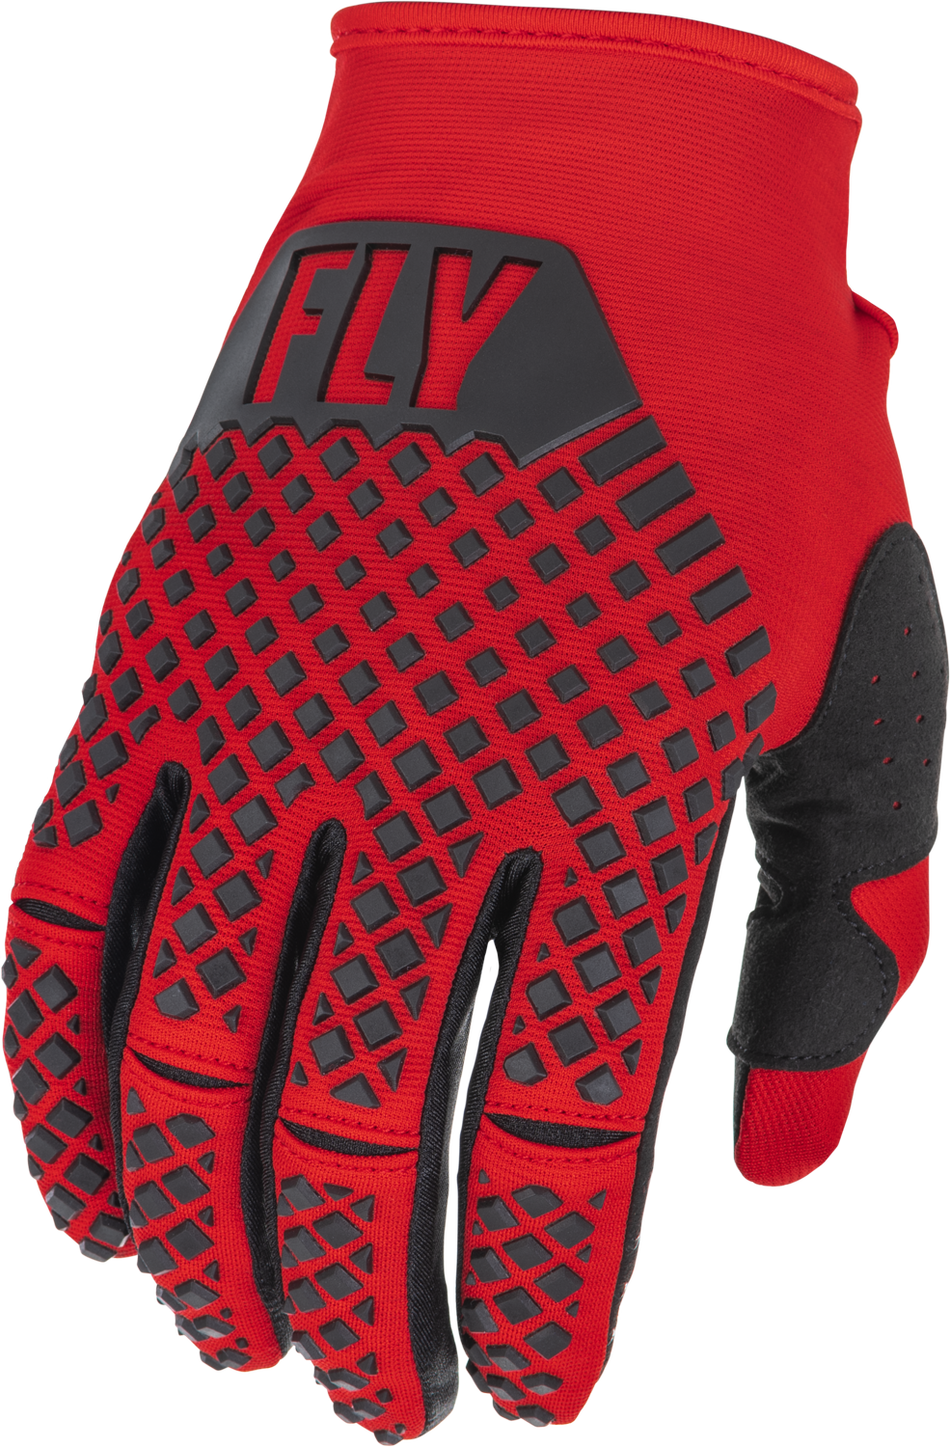 FLY RACING Kinetic Gloves Red/Black 2x 375-4132X